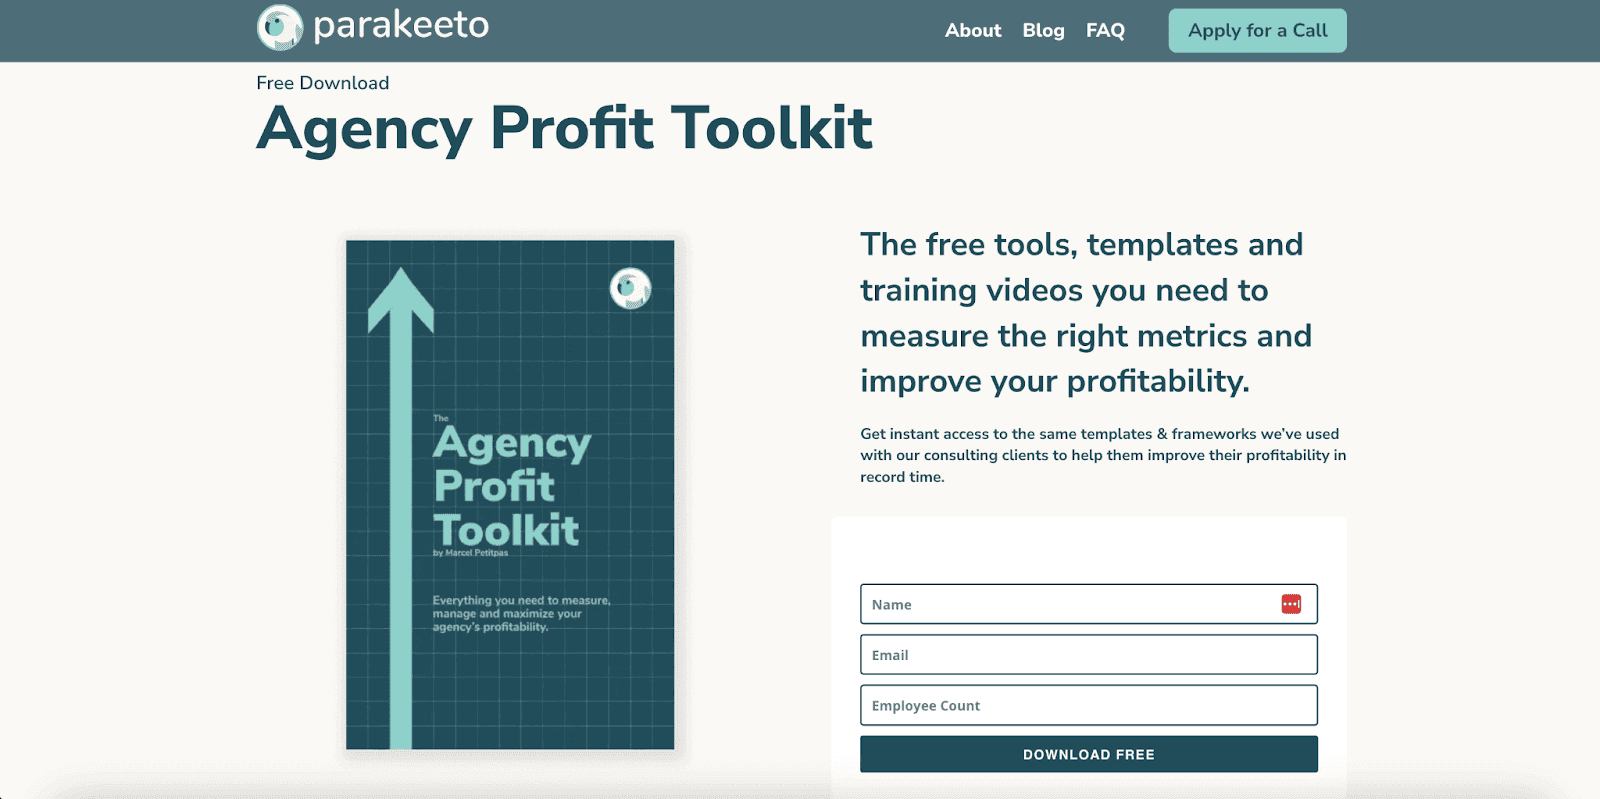 Gated download strategy from parakeeto on their agency profit toolkit